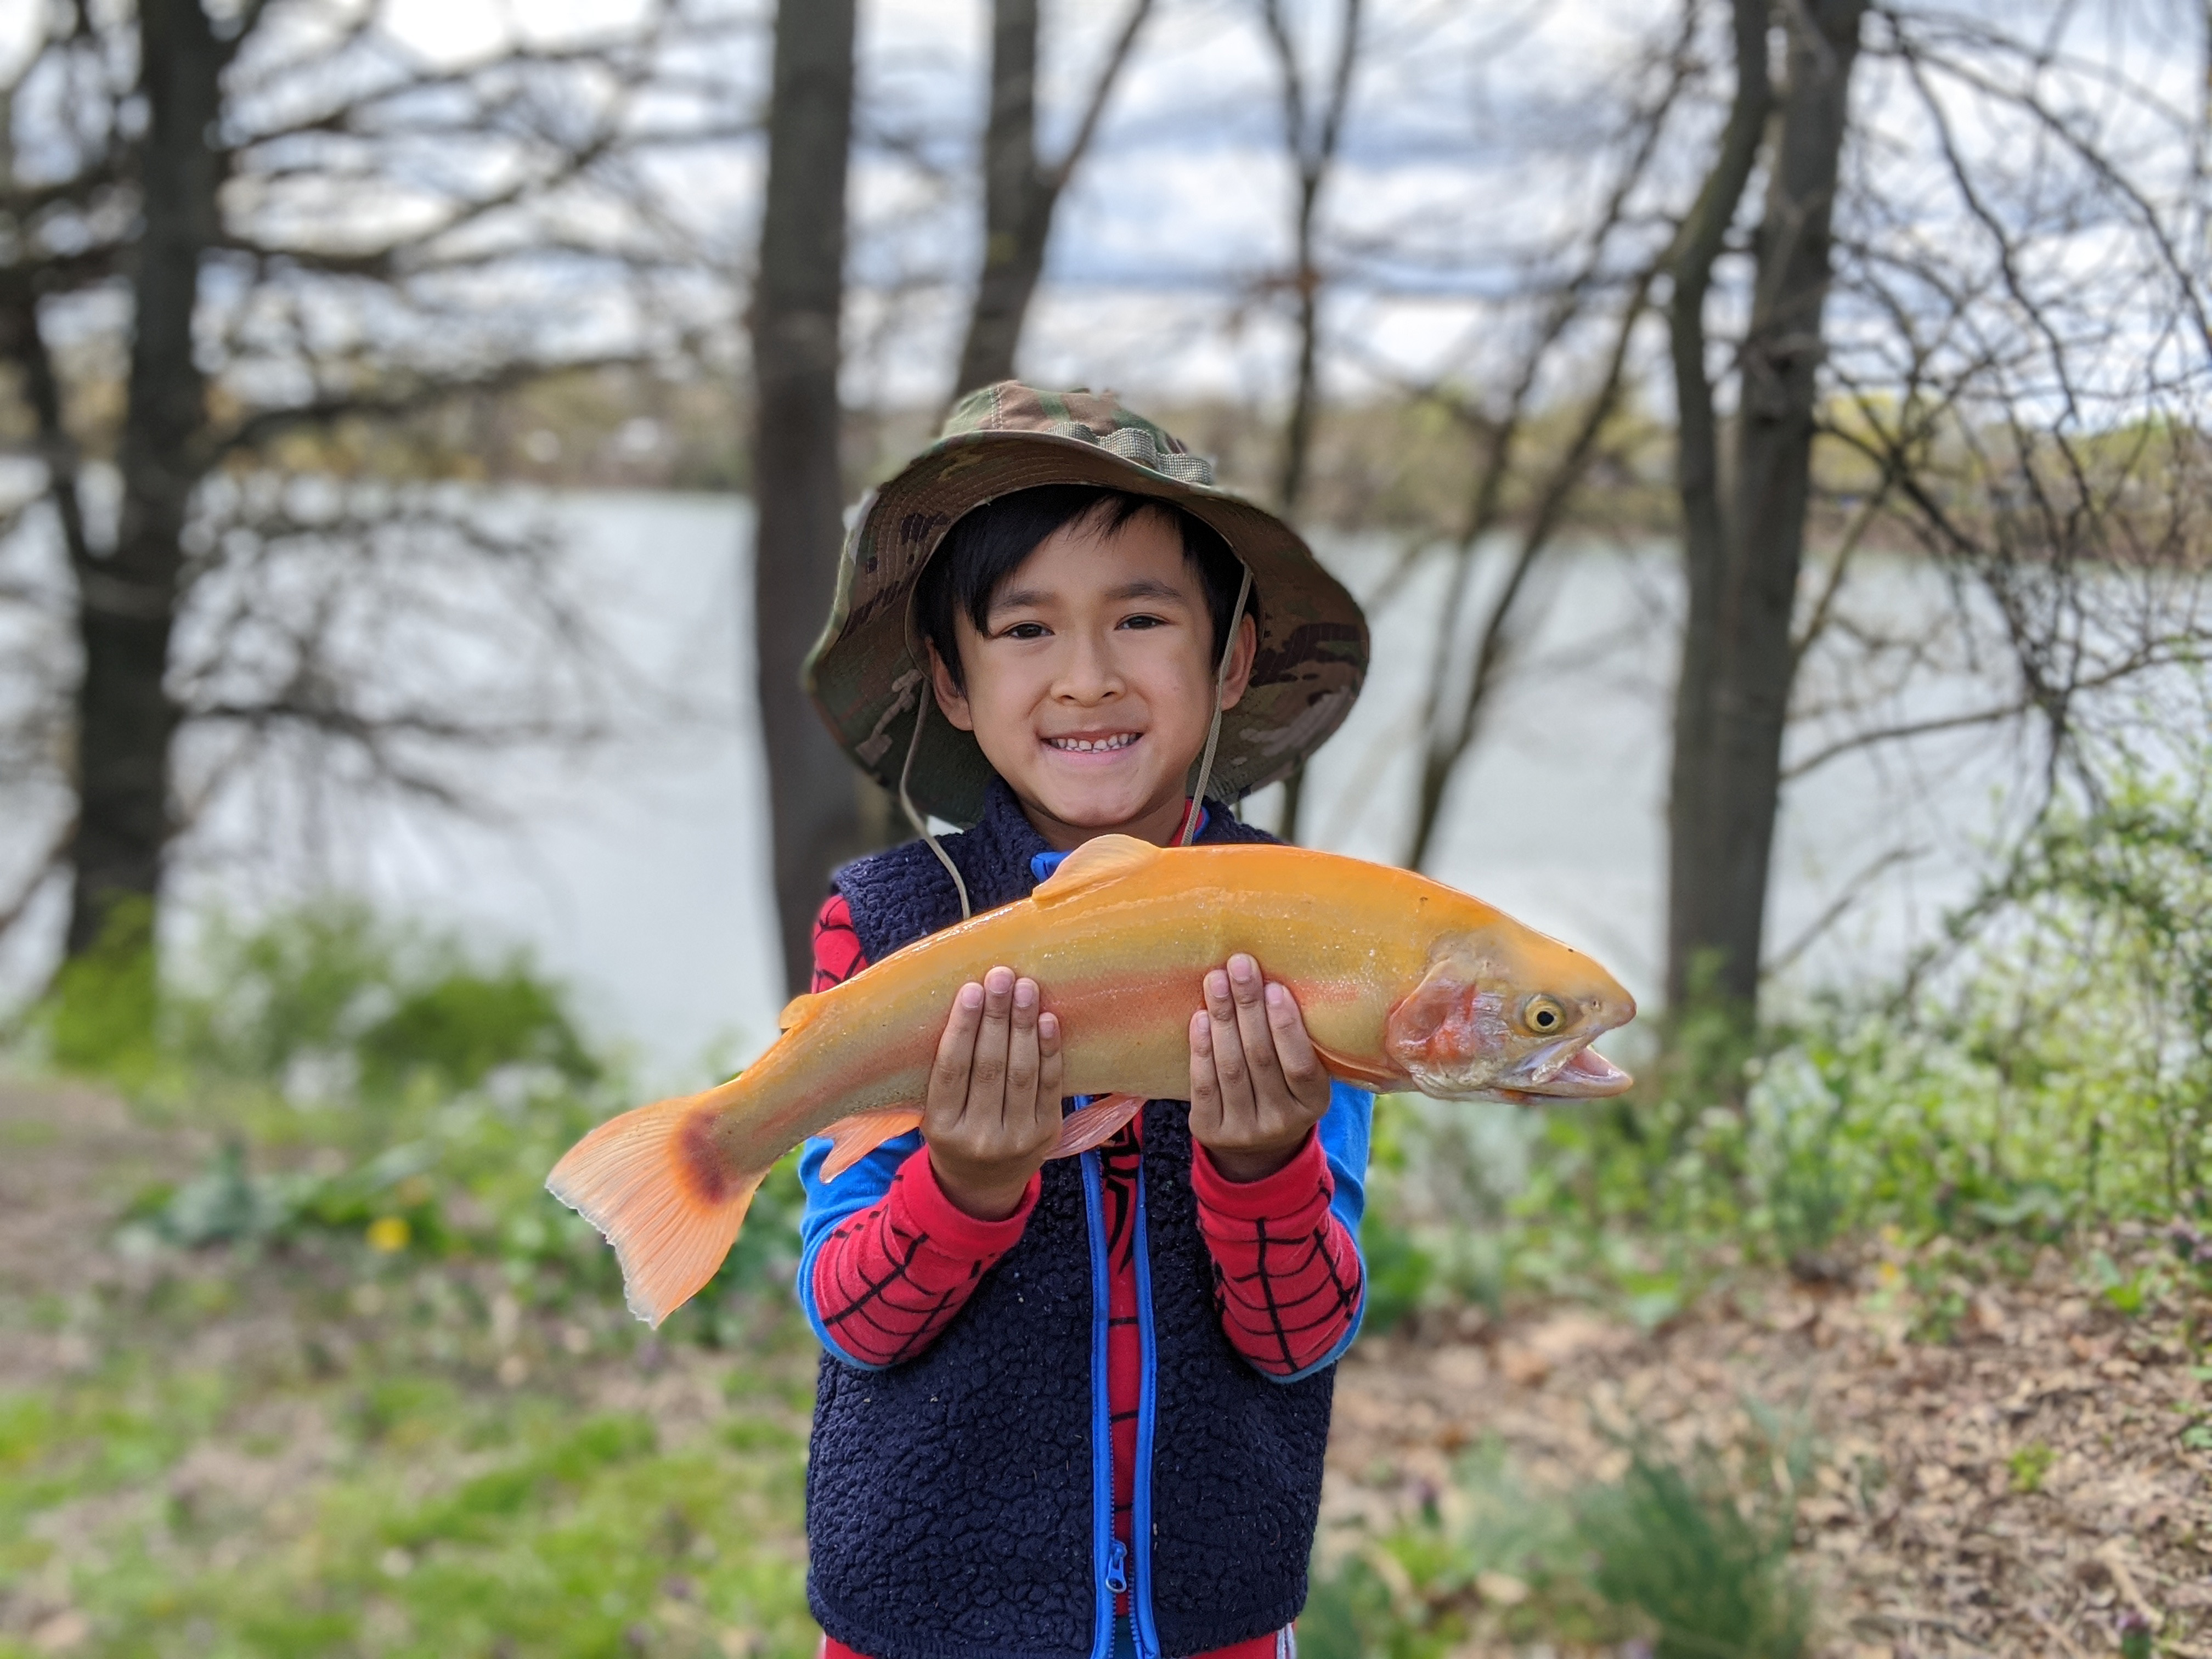 STATEWIDE MENTORED YOUTH TROUT FISHING DAY IS THIS SATURDAY, MARCH 27!